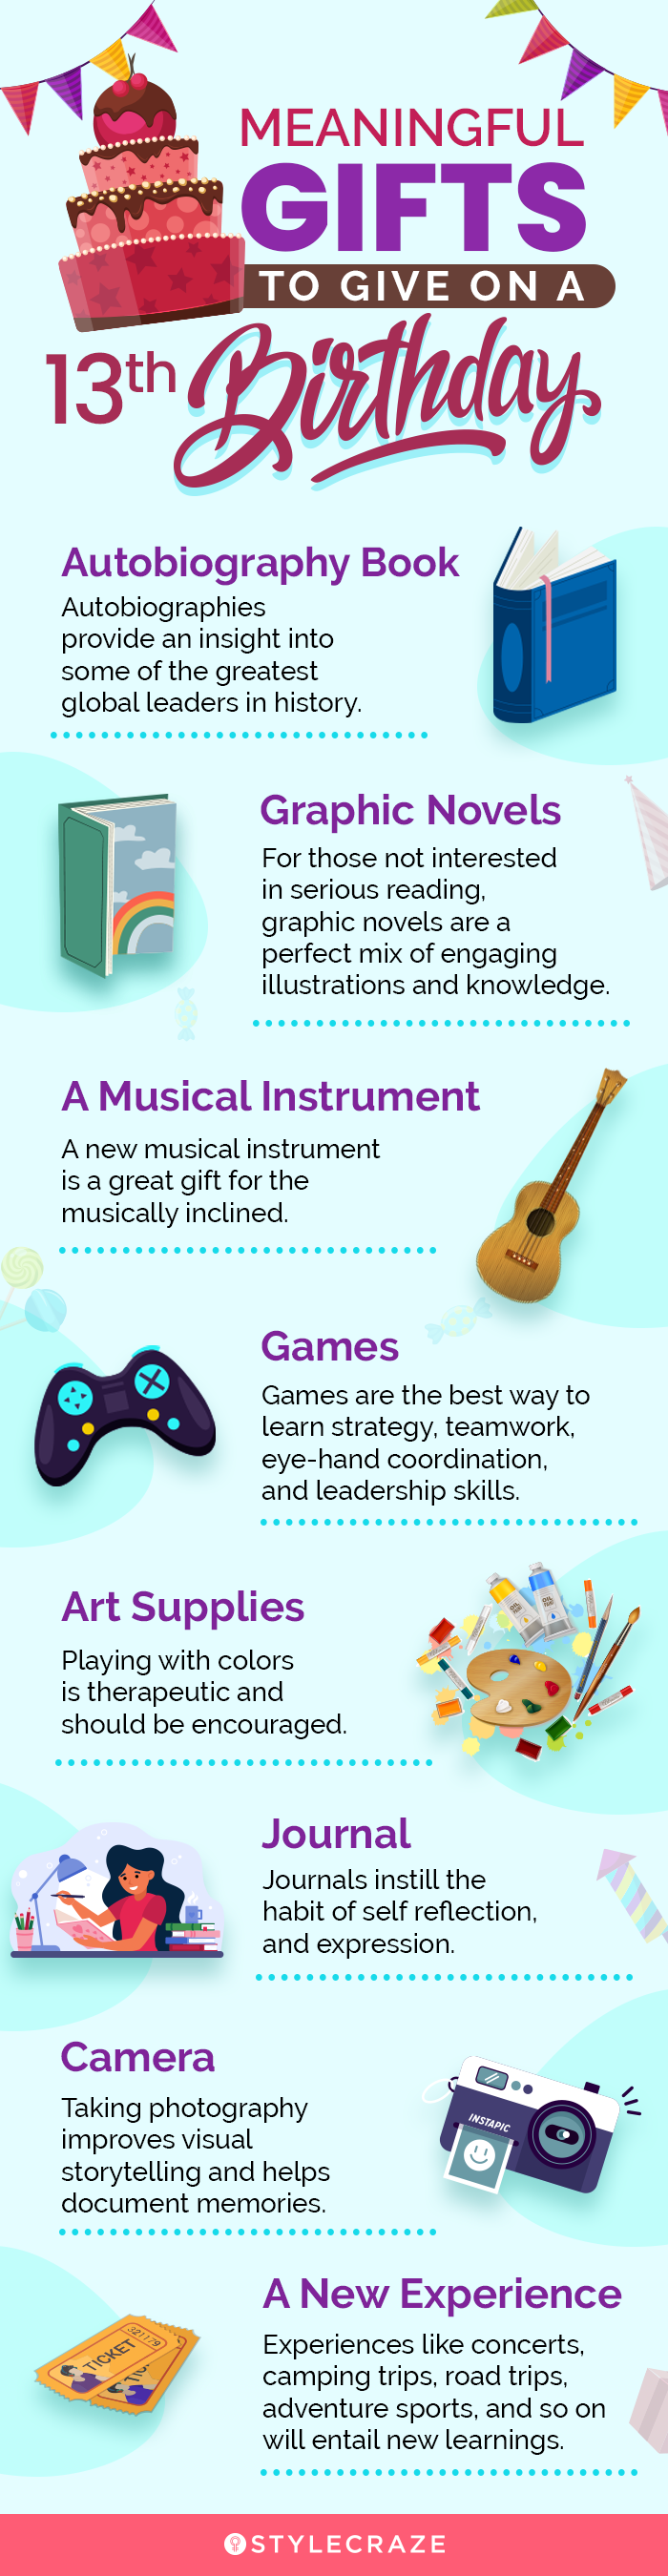 meaningful gifts to give on a 13th birthday (infographic)